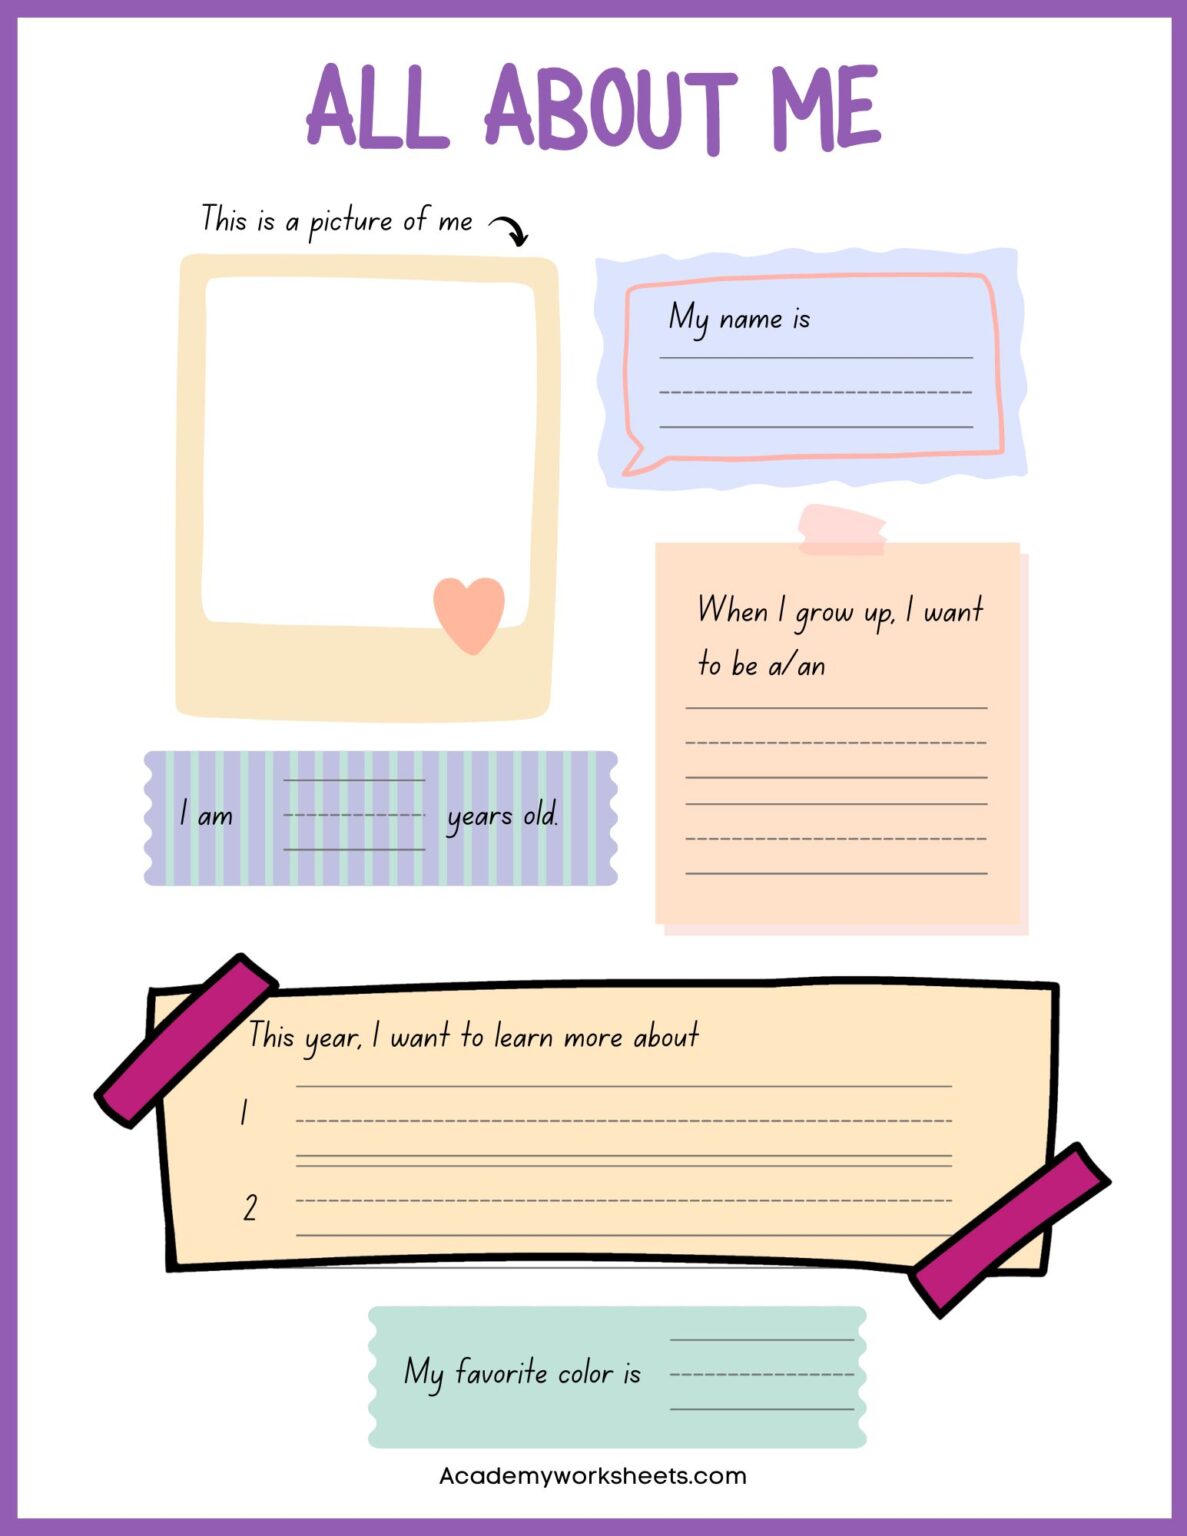 All About Me Worksheet 1187x1536 